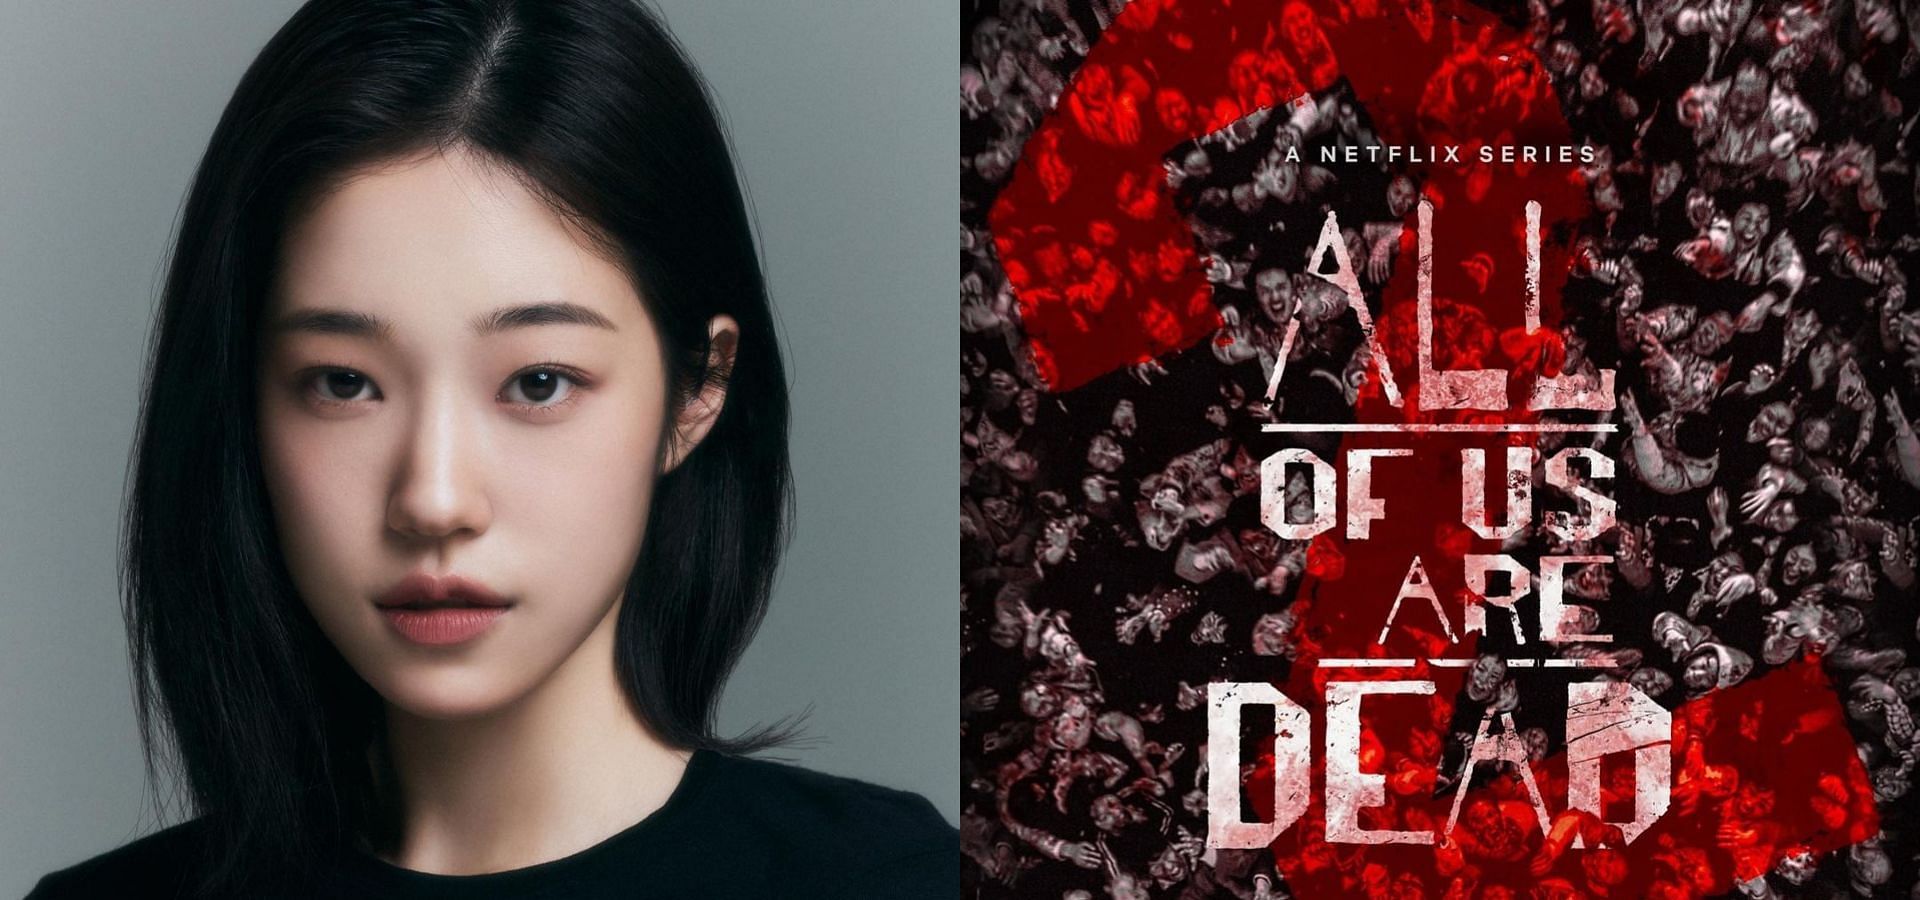 Noh Yoon-seo reportedly offered a role in All of Us Are Dead 2 (Images via@rohyoonseo, @netflixkcontent) 